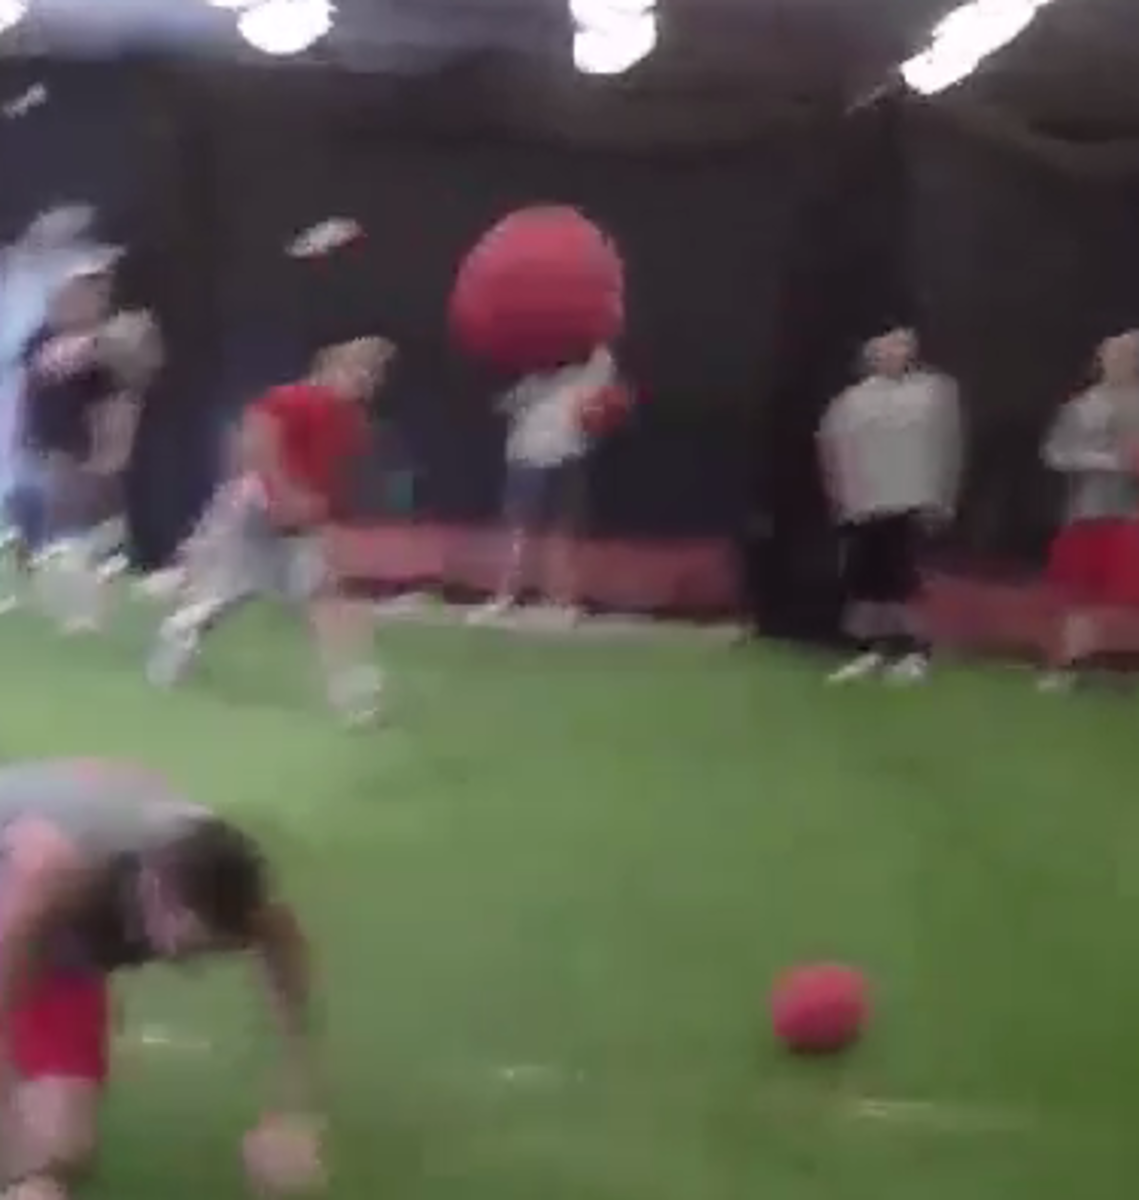 A dodgeball goes flying as the Ohio State football team plays dodgeball.